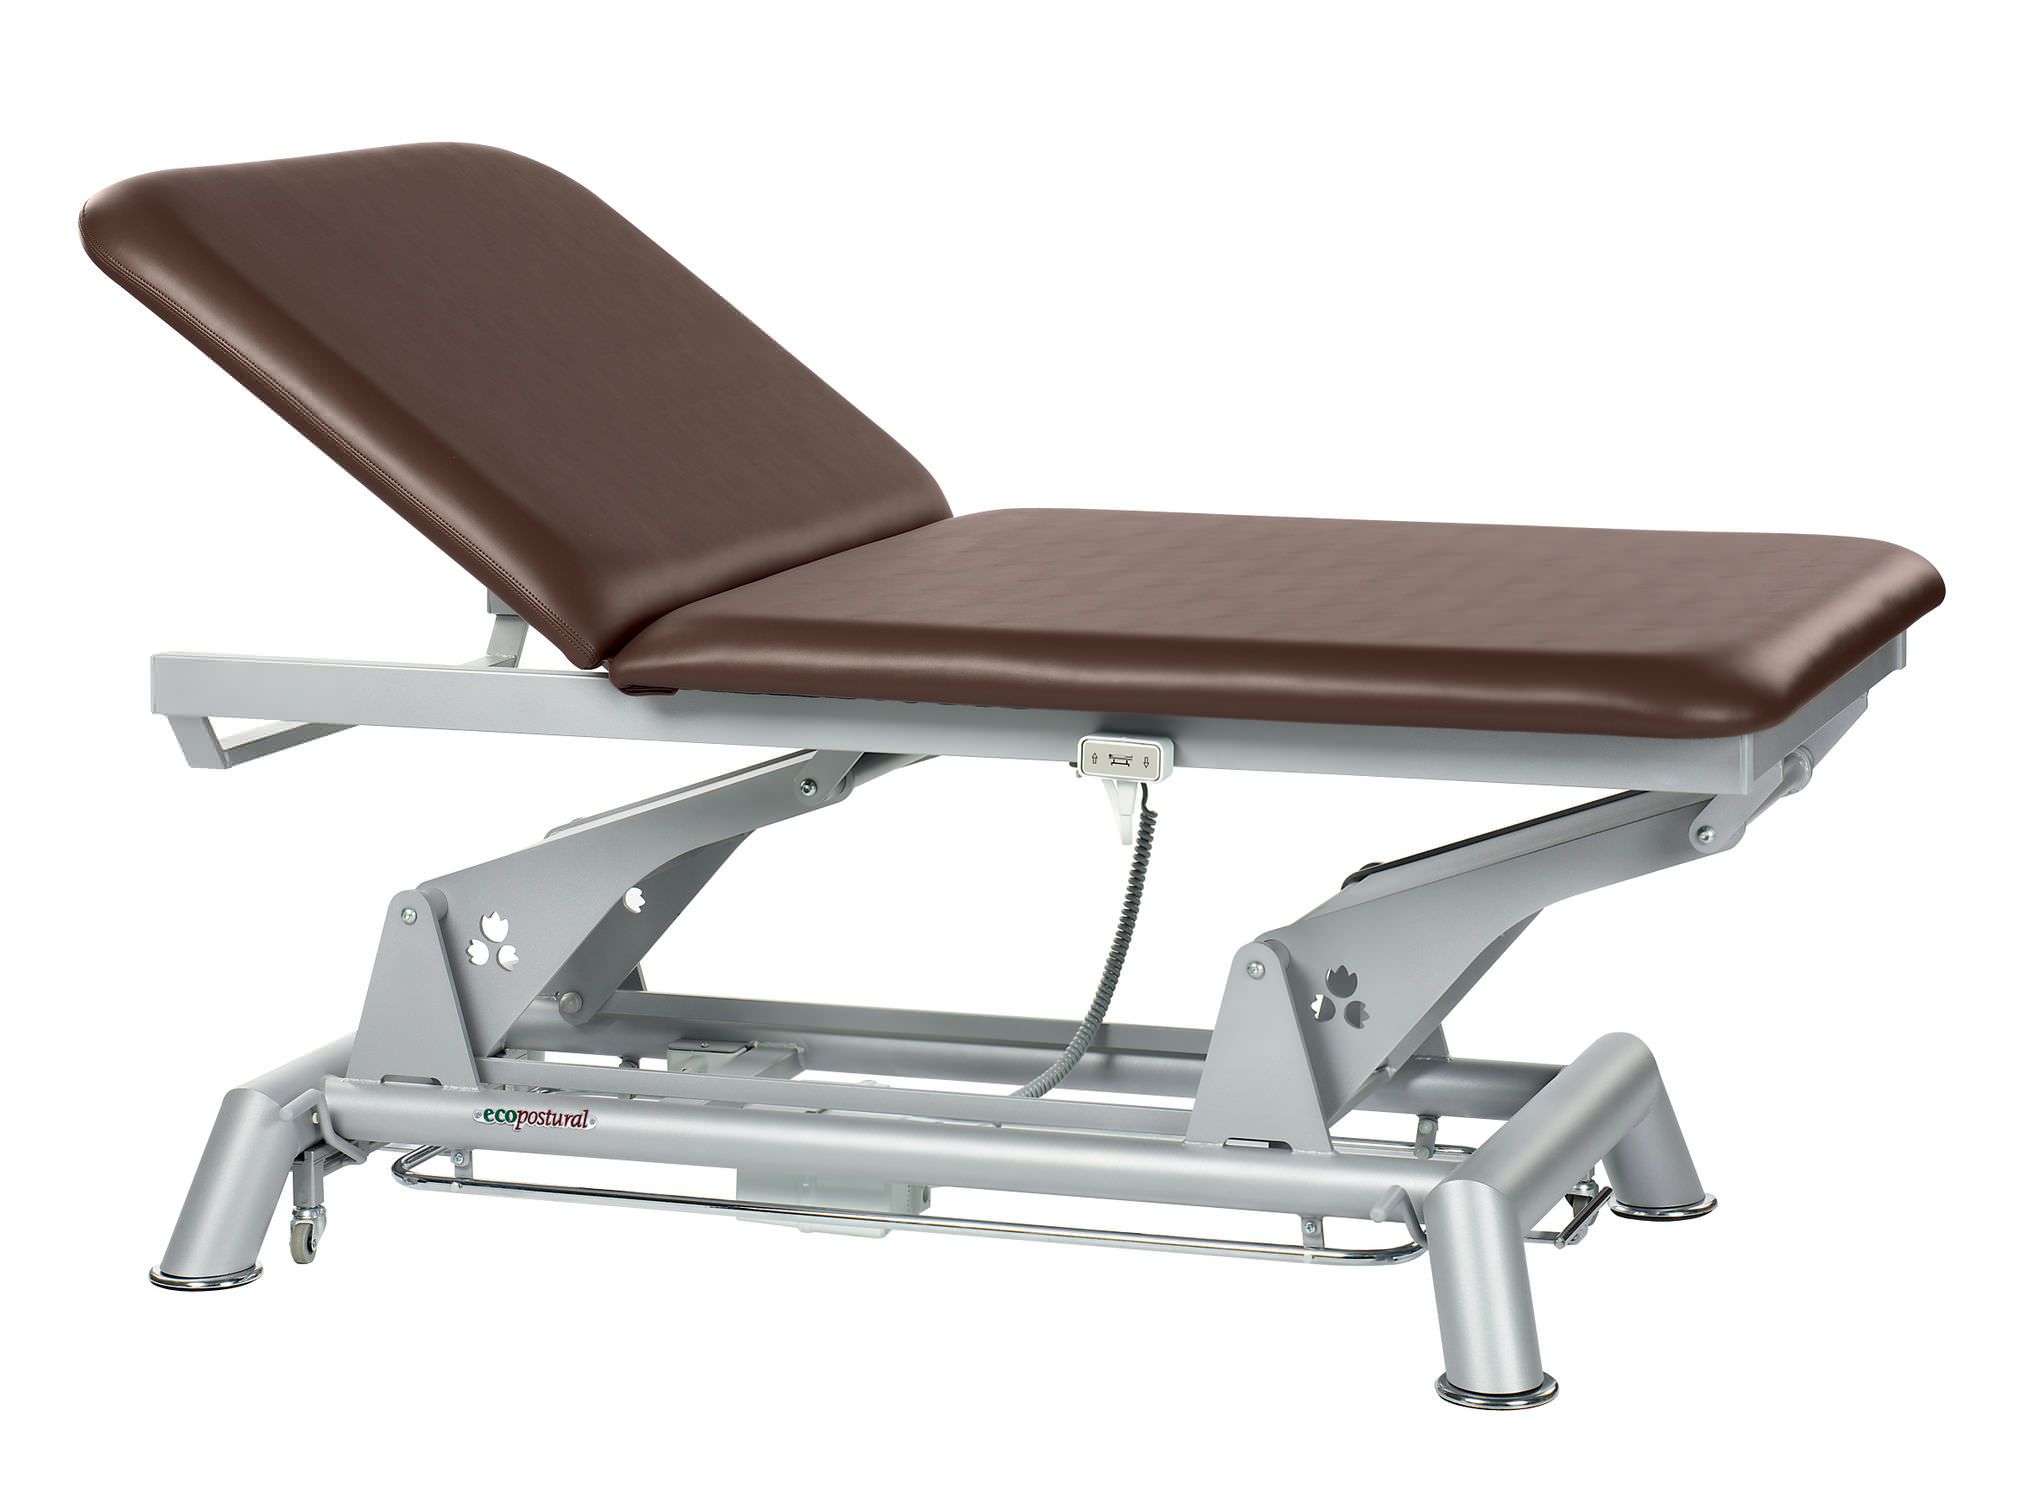 Electric Bobath table / on casters / height-adjustable / 2 sections C-5014H-M82 Ecopostural